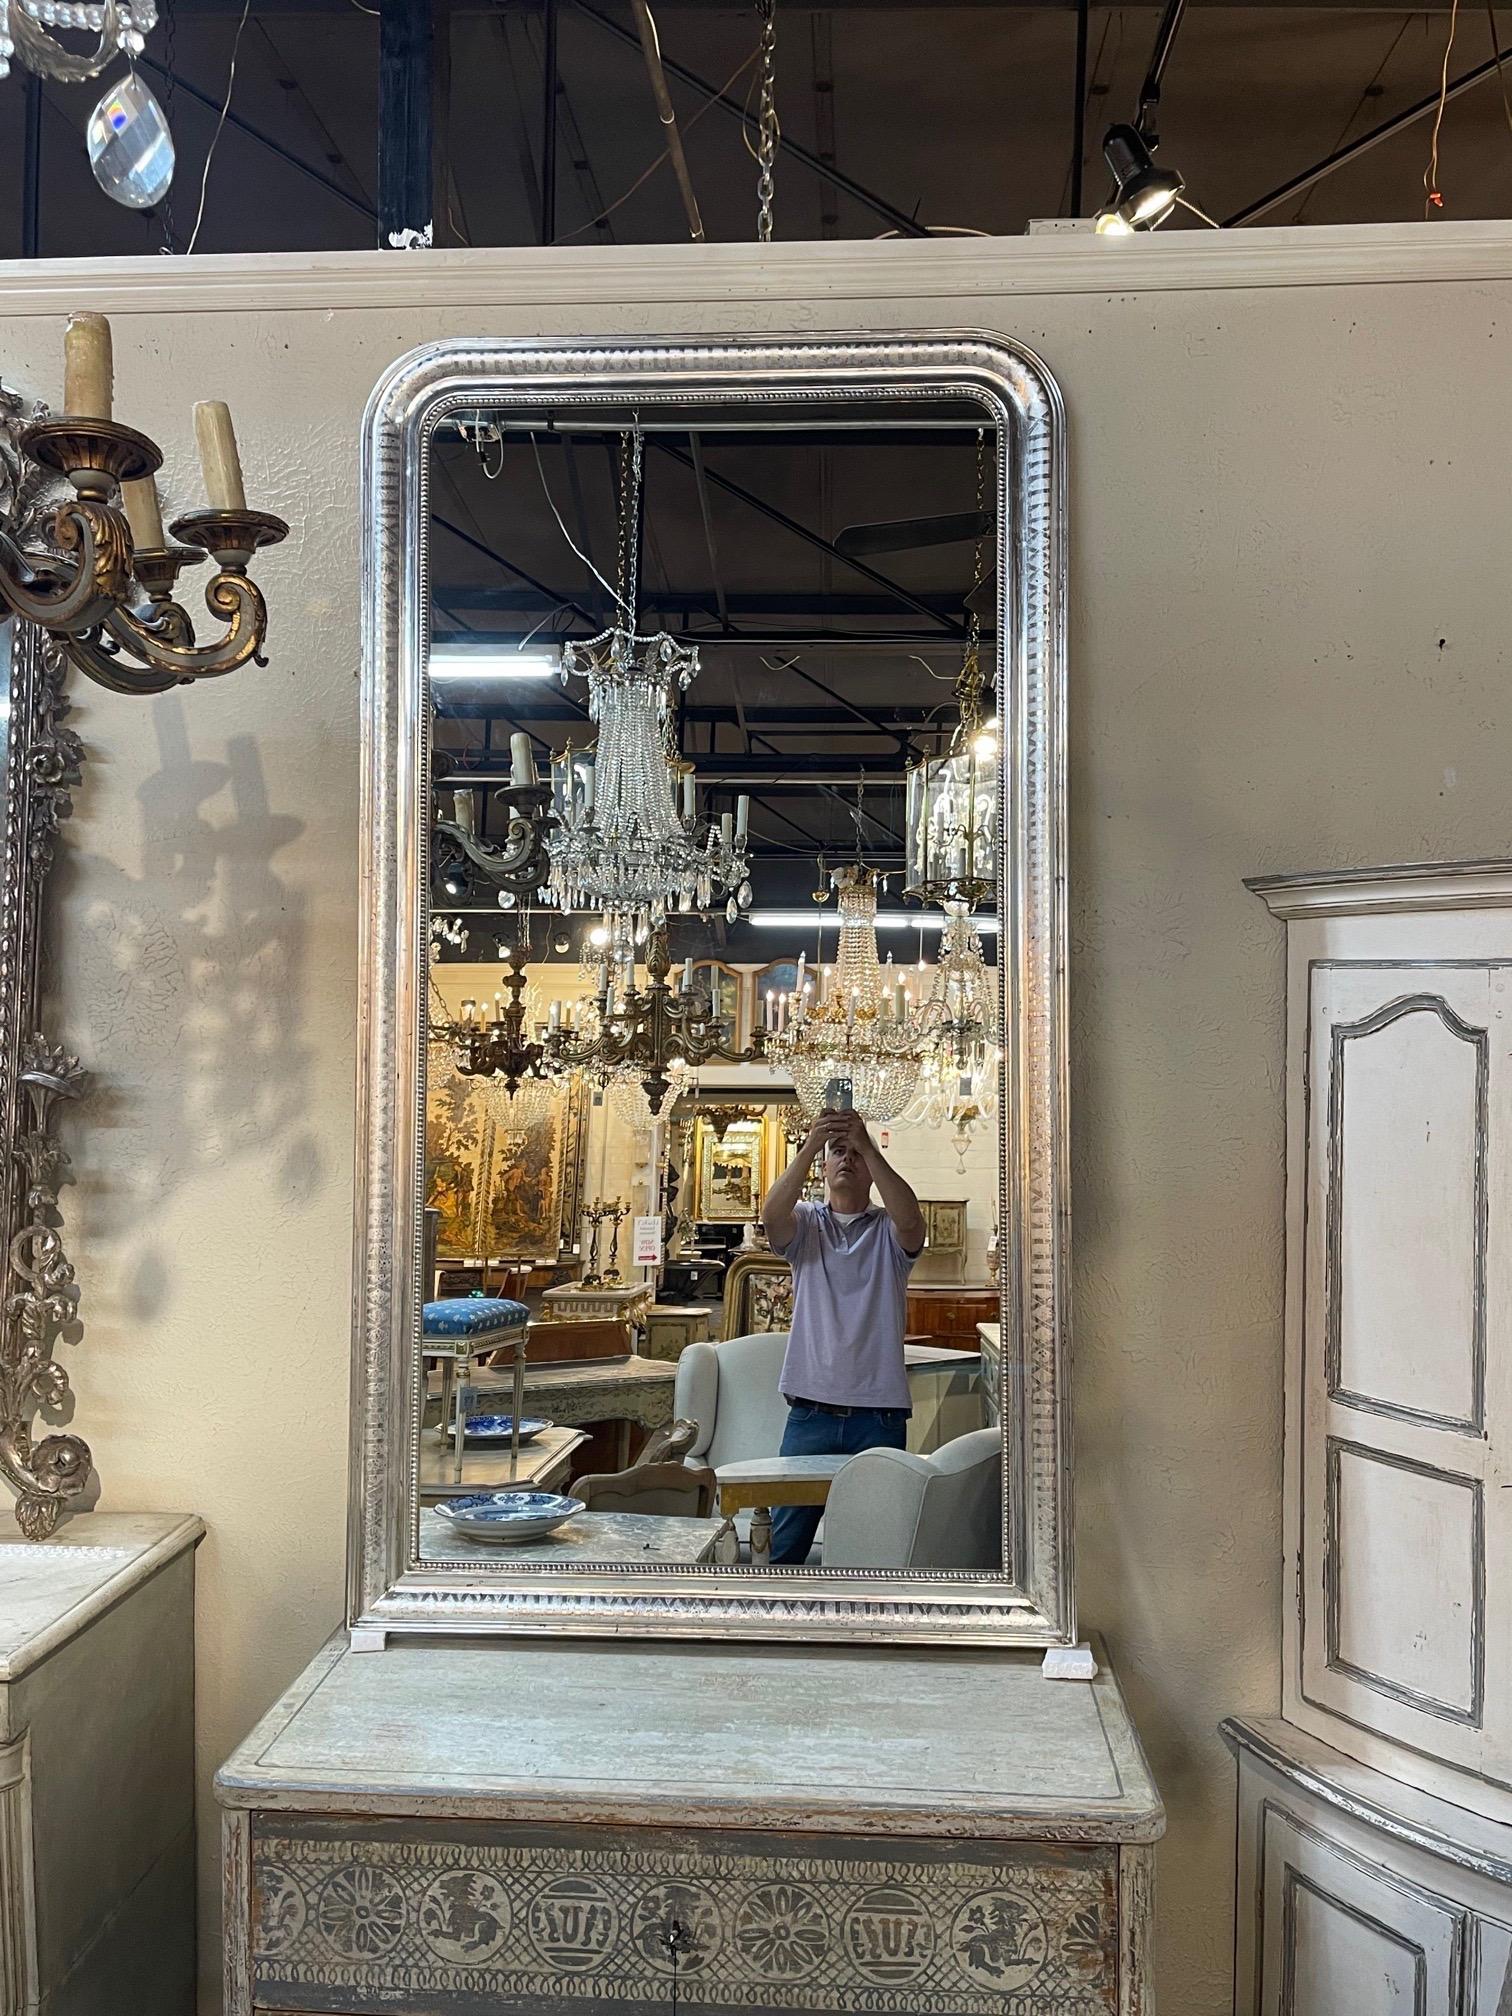 Very fine pair of large scale silver Louis Philippe mirrors with x pattern. These also have a pretty beaded inner border. Makes a huge impact. Gorgeous!